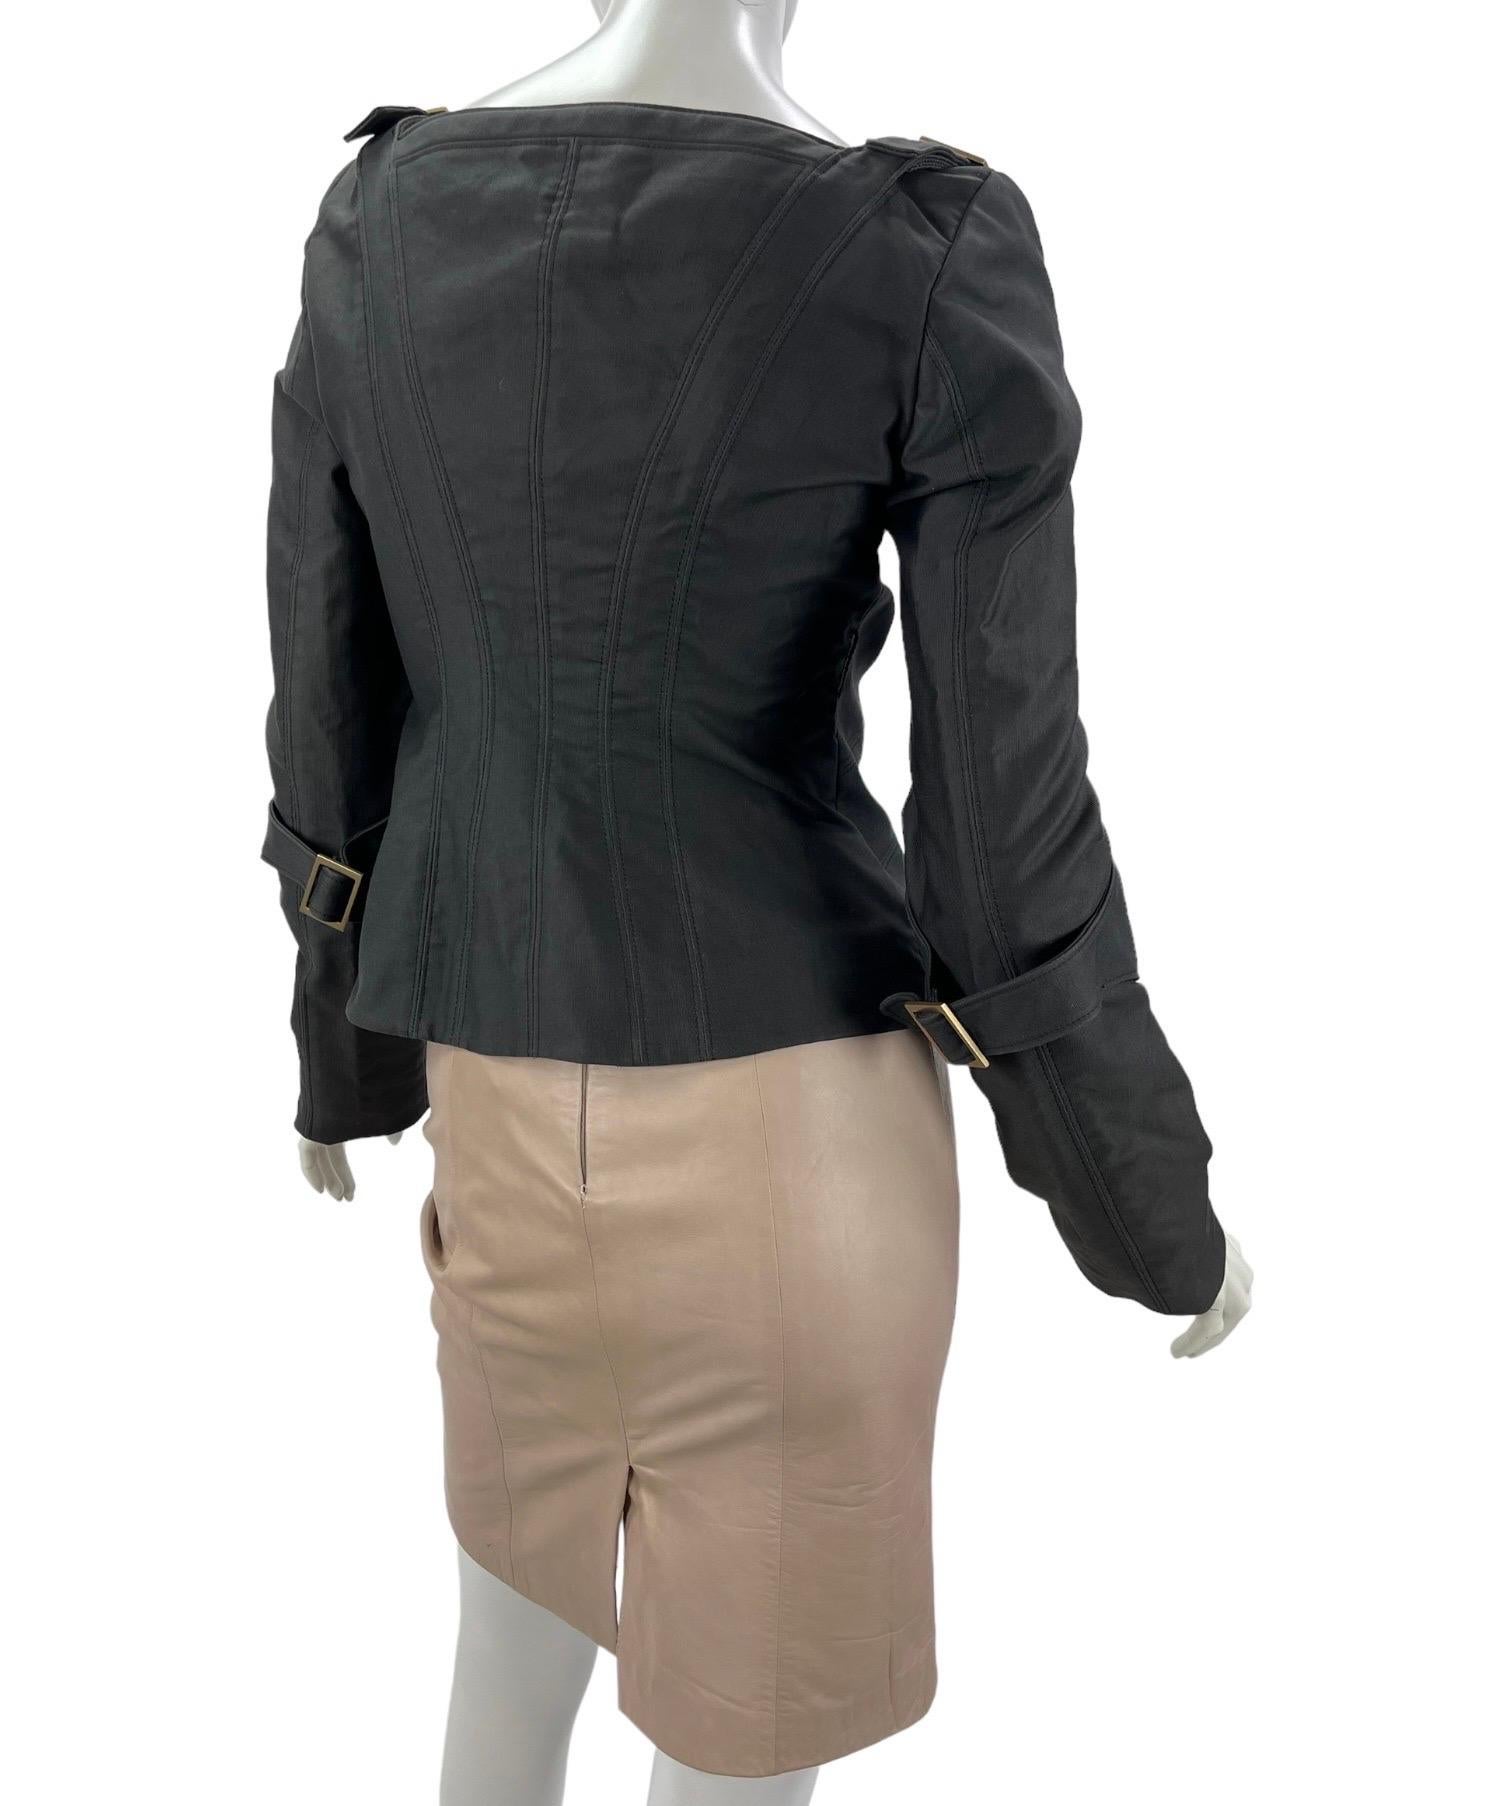 Women's 2003 Vintage Tom Ford for Gucci Chocolate Brown Corset Jacket Italian 40 US 4 For Sale